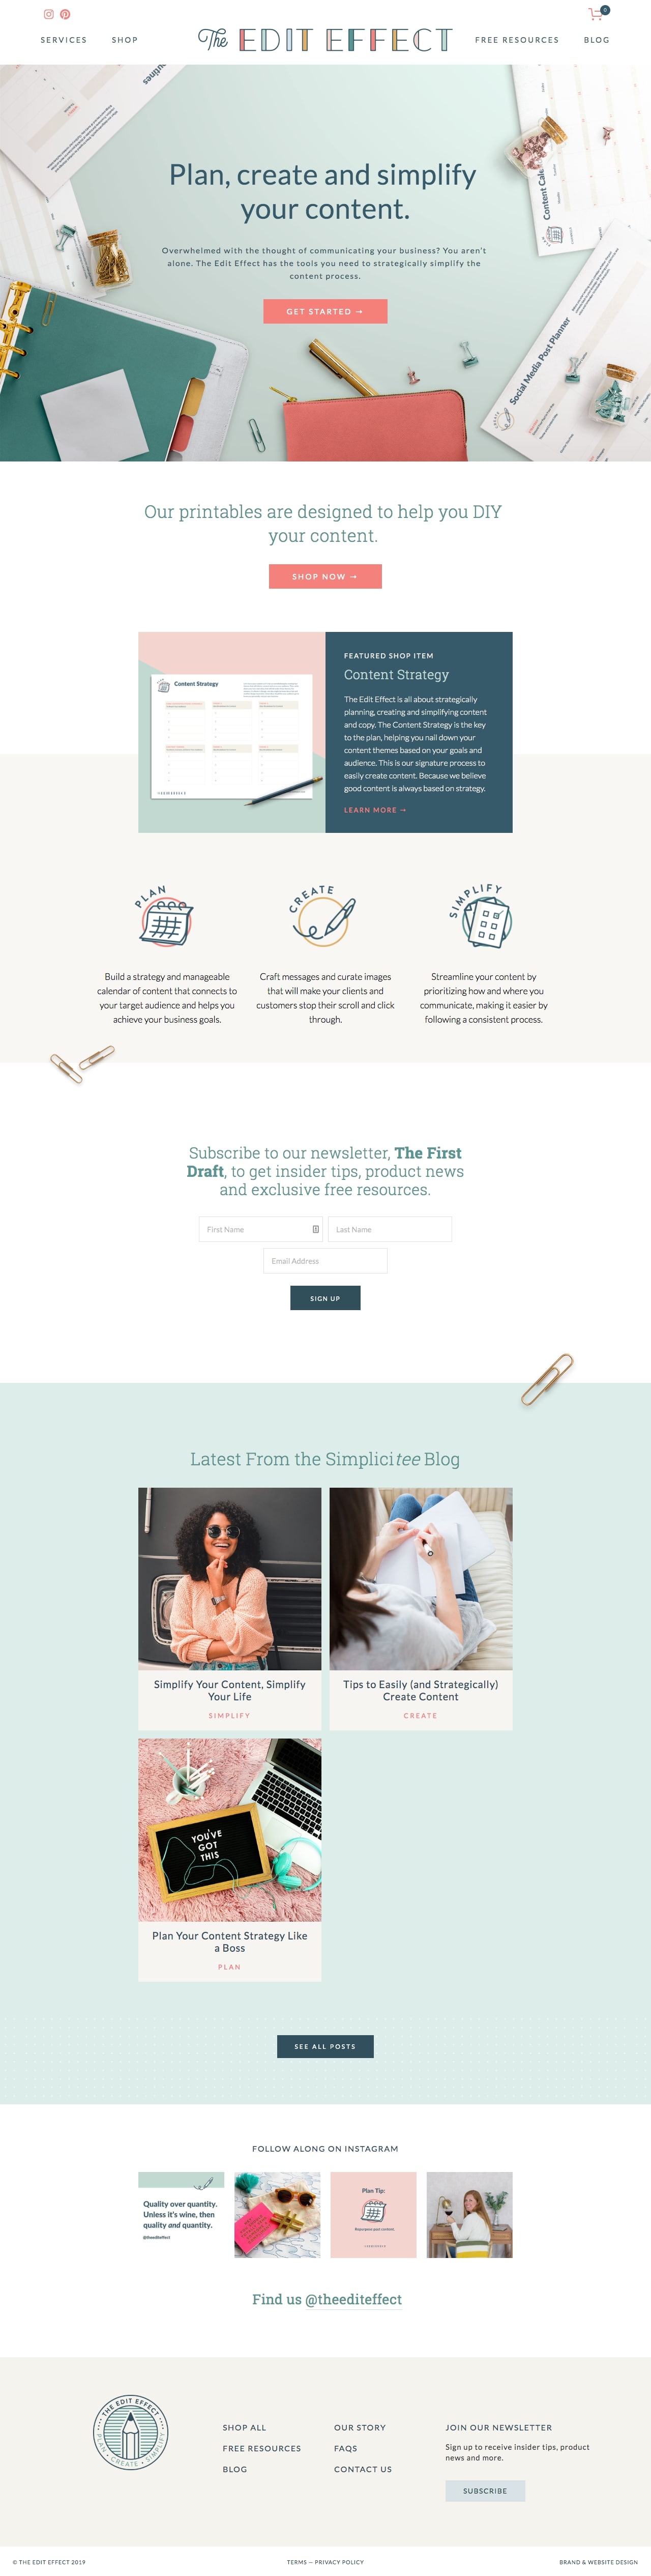 10-best-examples-of-squarespace-websites-for-marketing-businesses